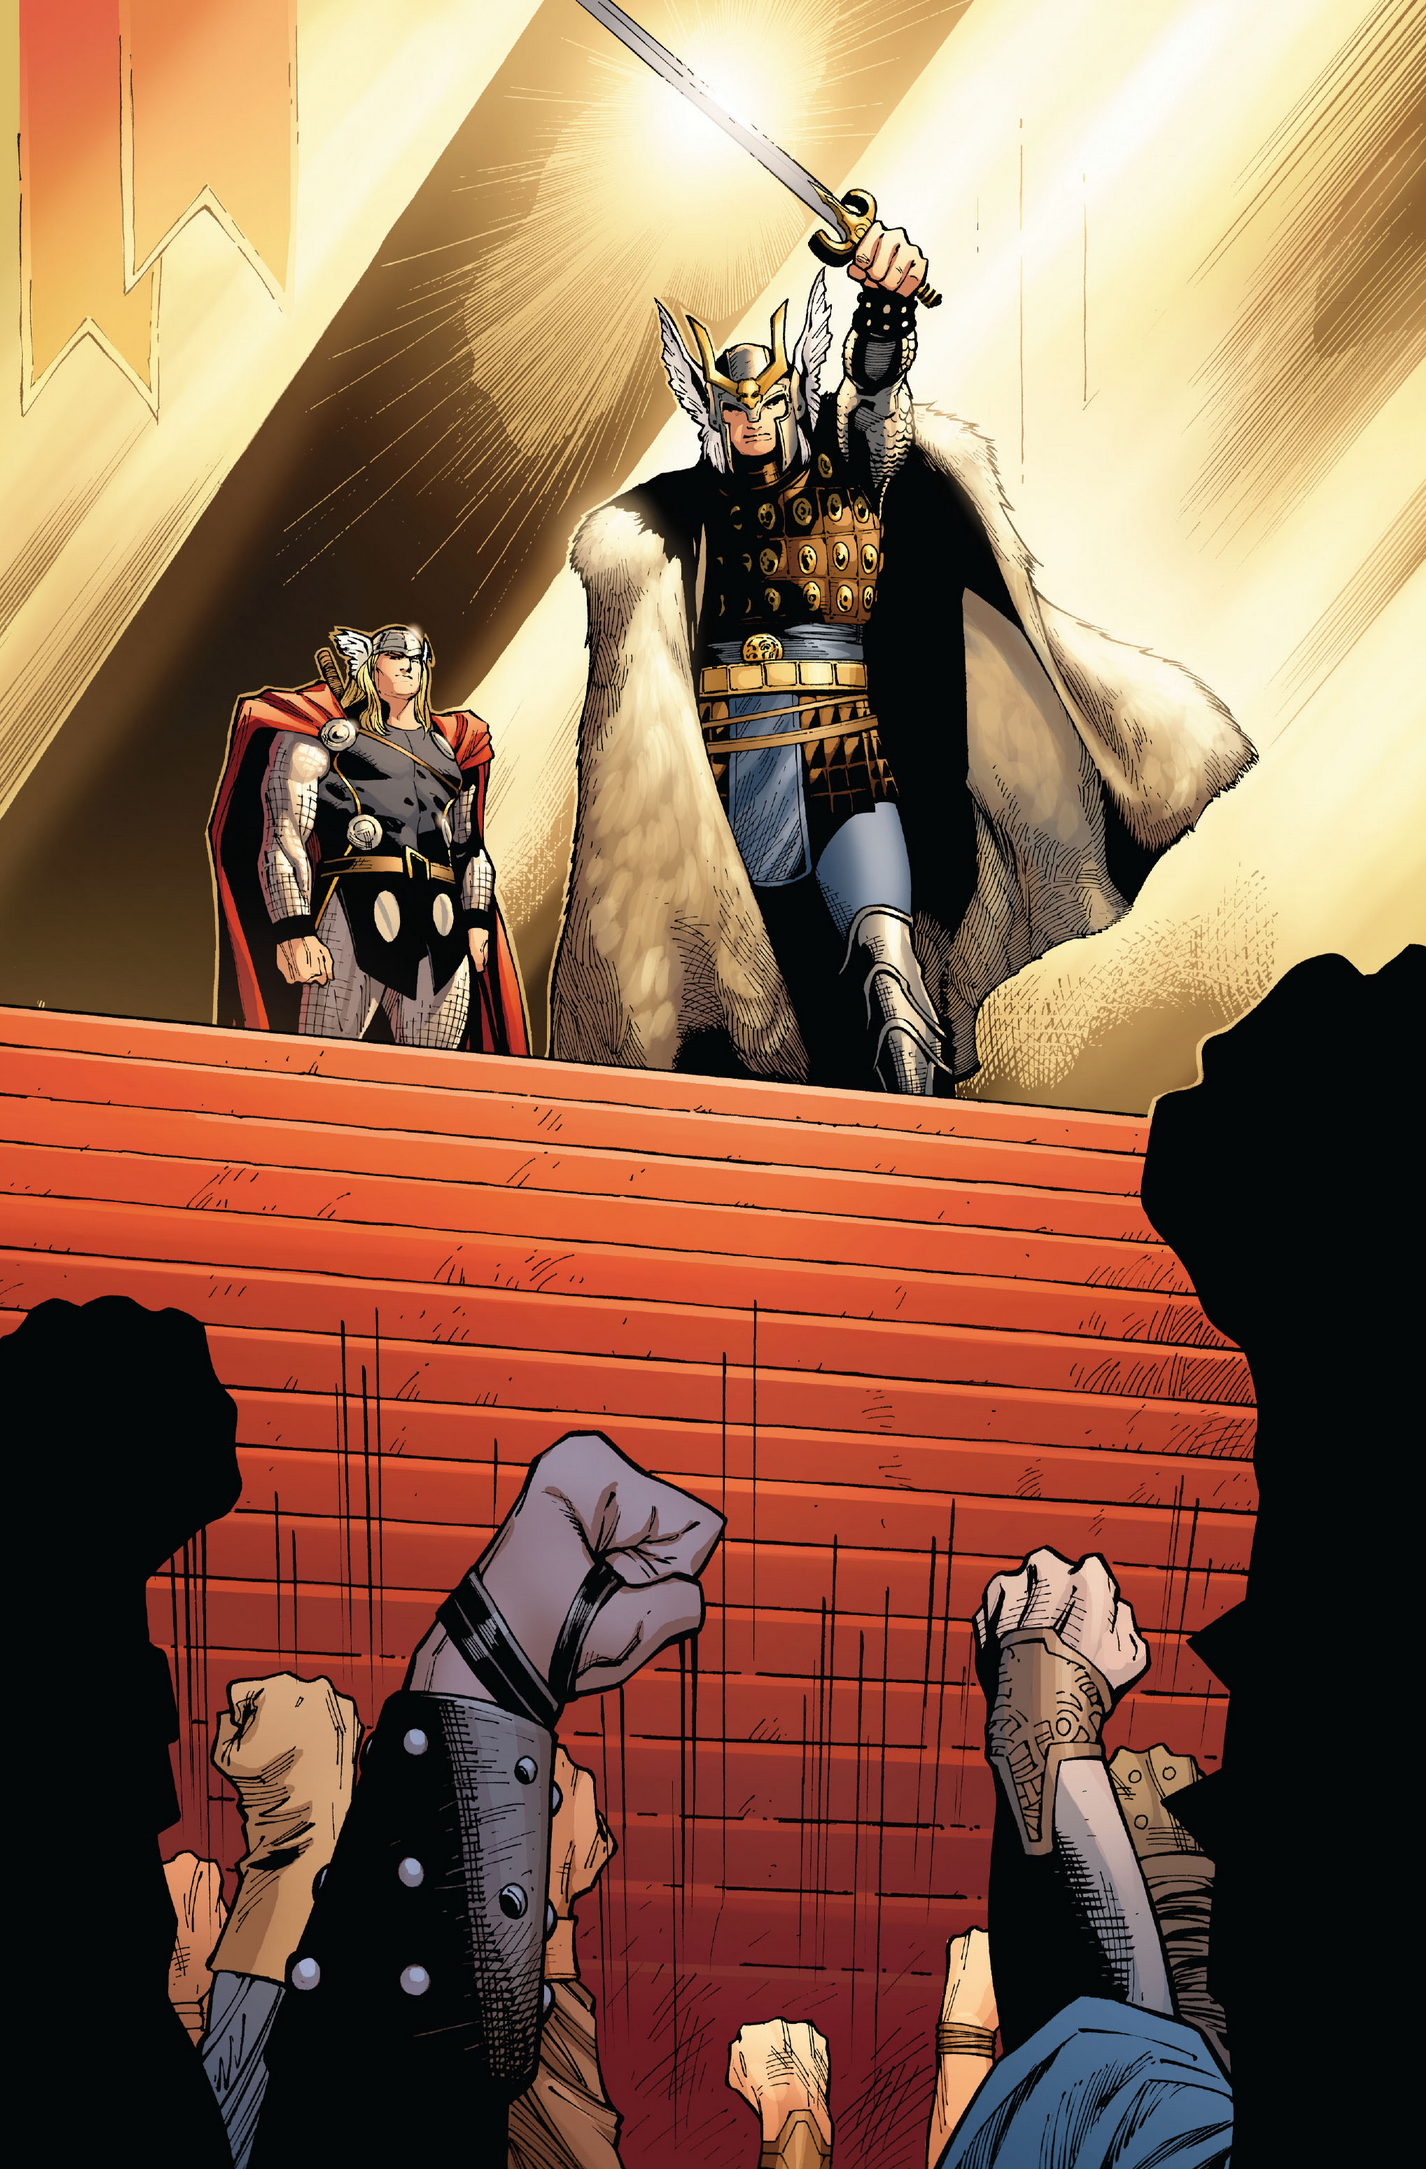 Balder the Brave takes the throne of Asgard in Thor Vol. 3 #10 (2008), Marvel Comics. Art by Olivier Copiel.